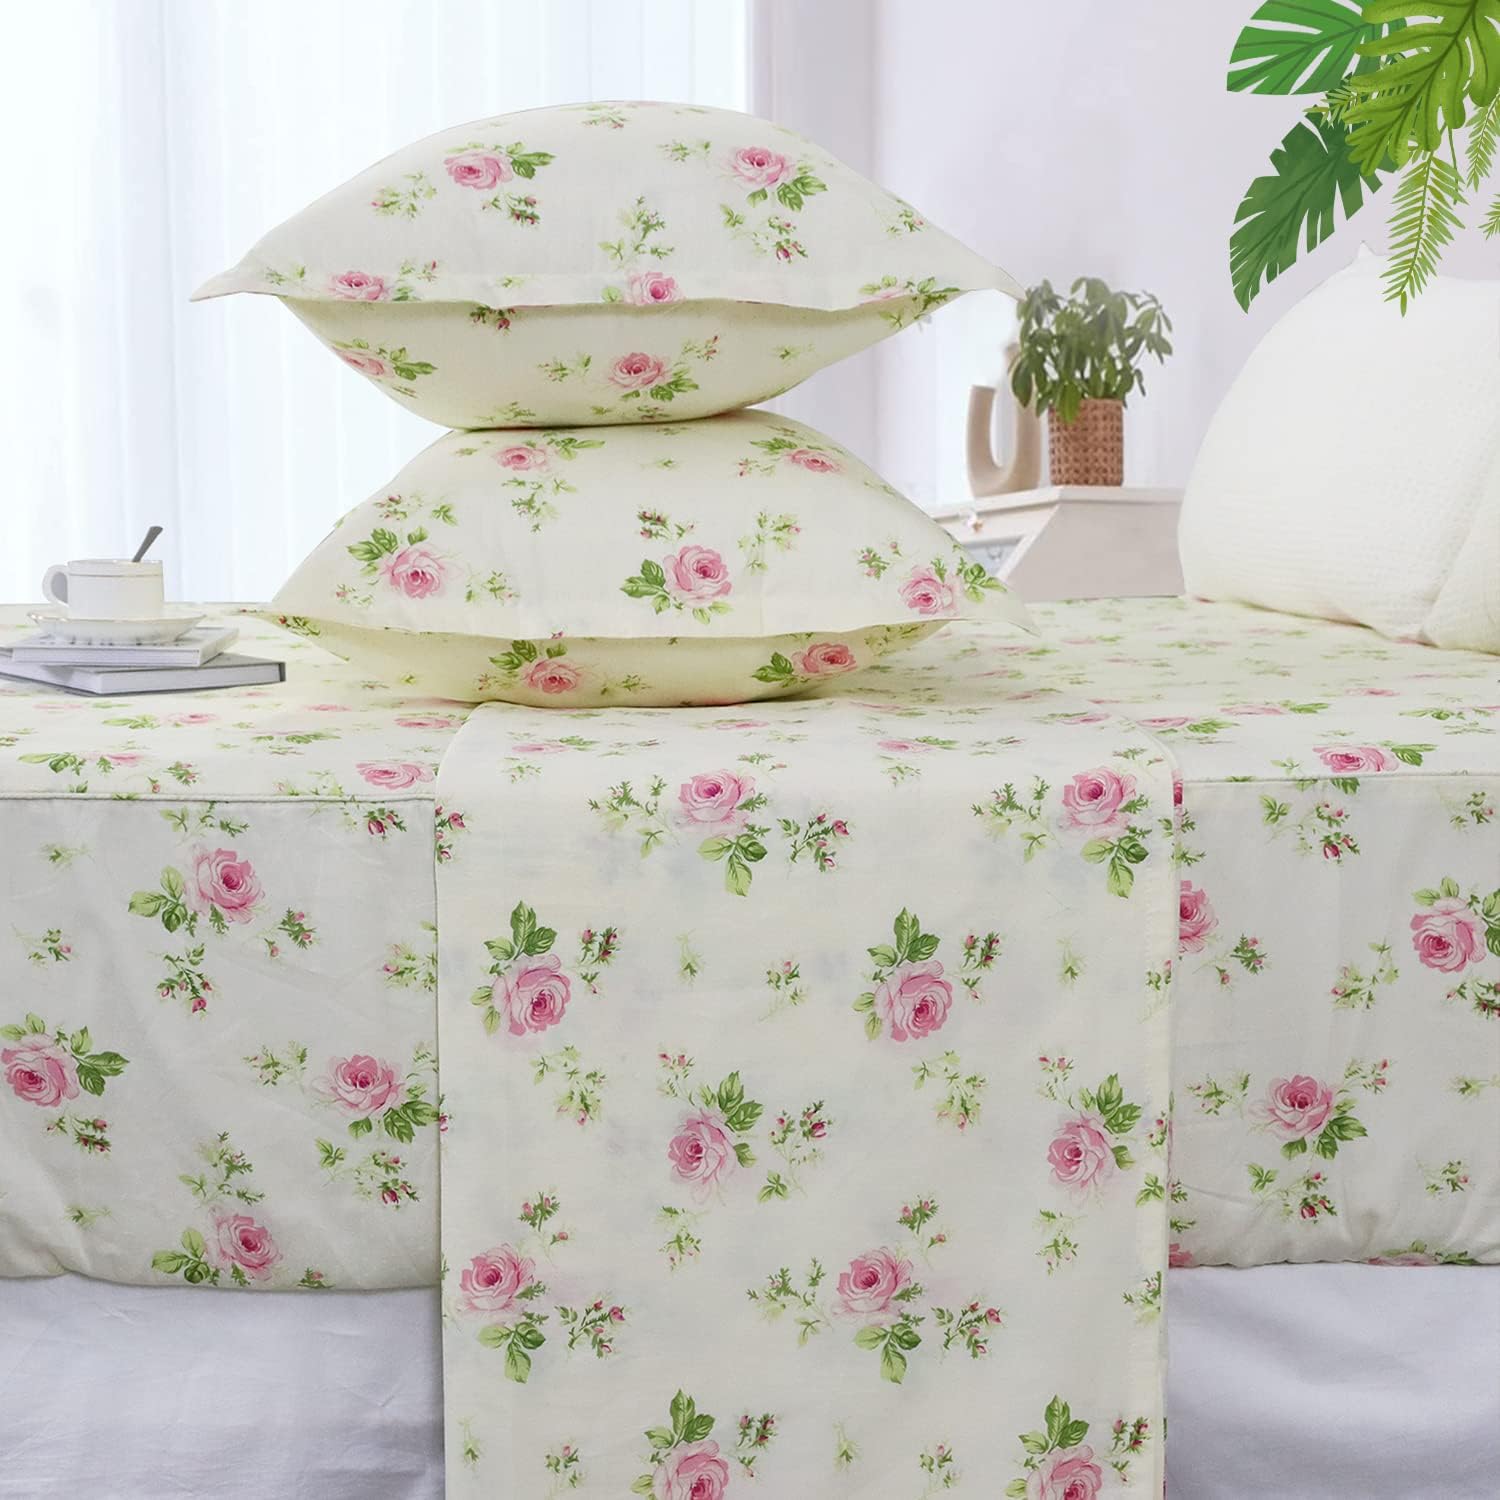 FADFAY Floral Sheets for Queen Size Bed Cotton Pink Rose Bed Shees Shabby & Chic Bedding Light Yellow Rosette Print Breathable Soft Luxury Deep Pocket Fitted Sheets 4Pcs,Queen